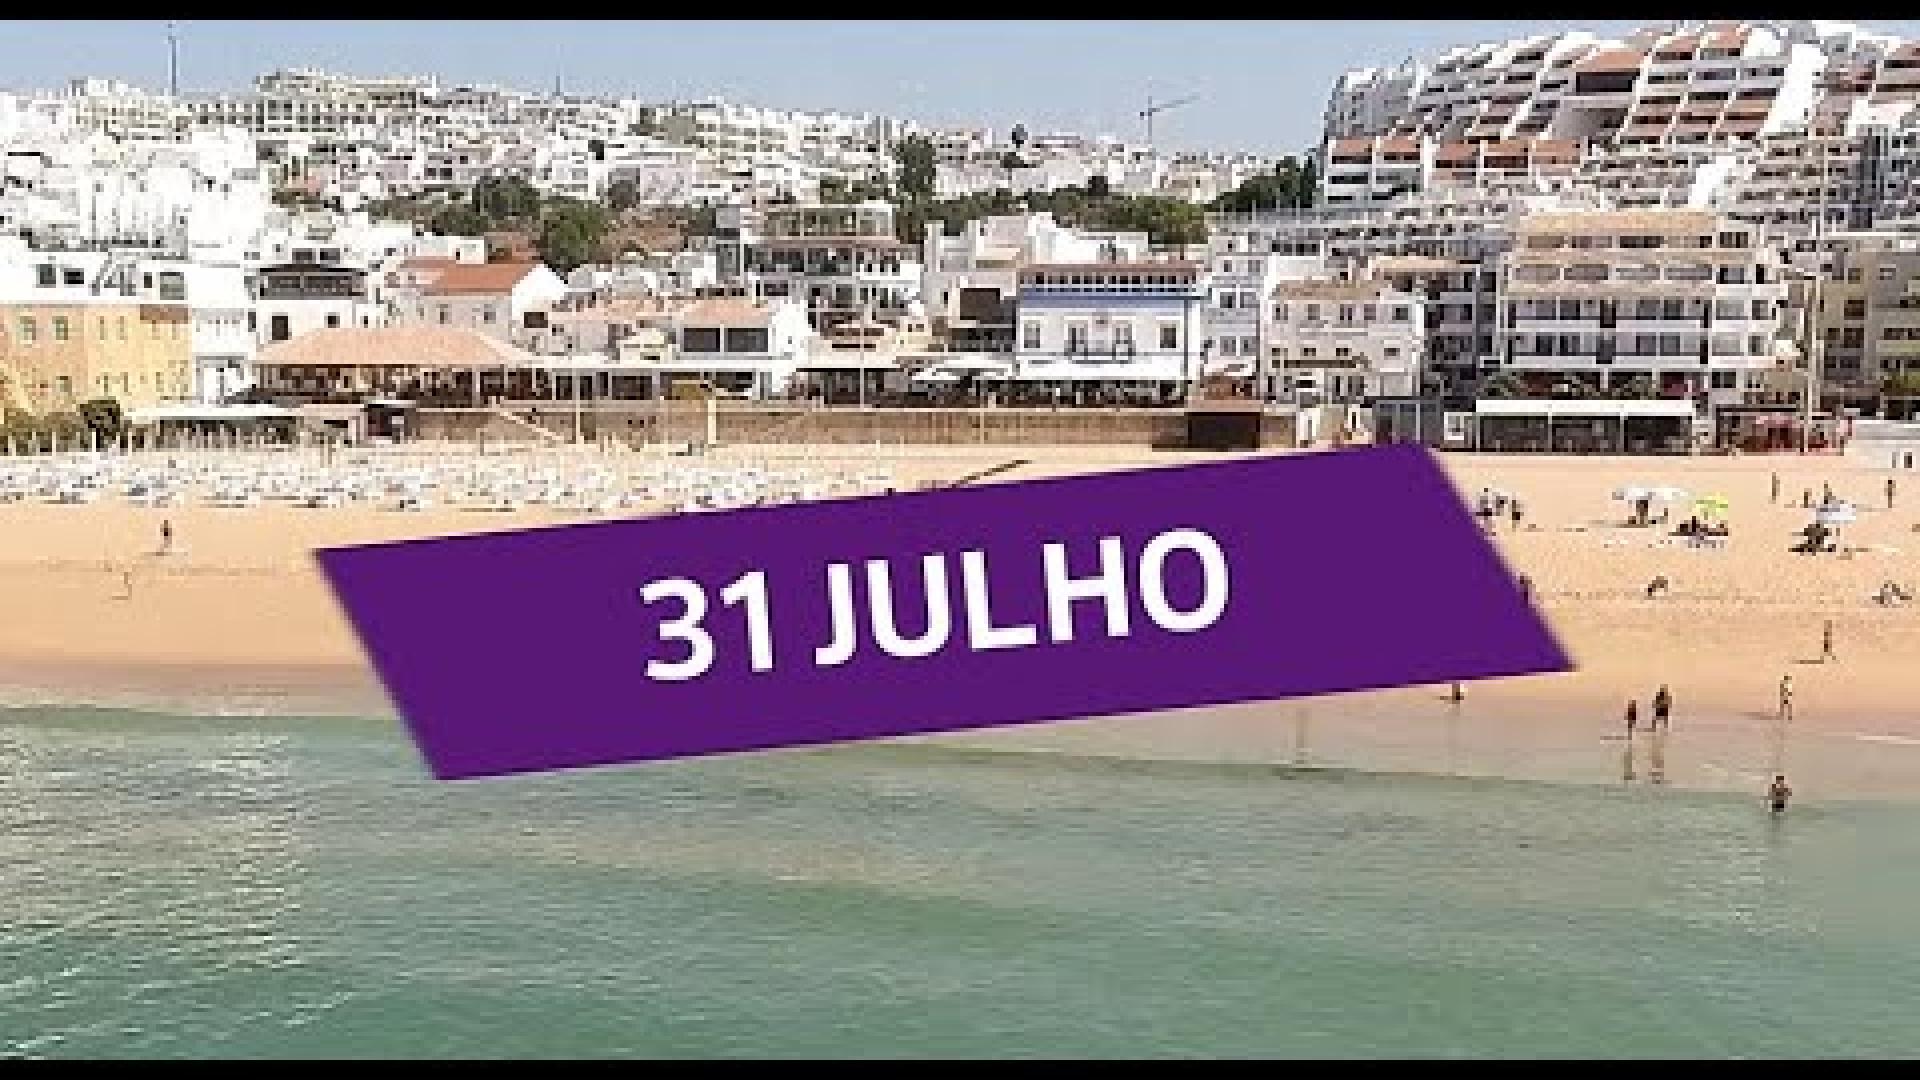 Preview image for the video "Albufeira Summer Live _ Promo 31 julho".